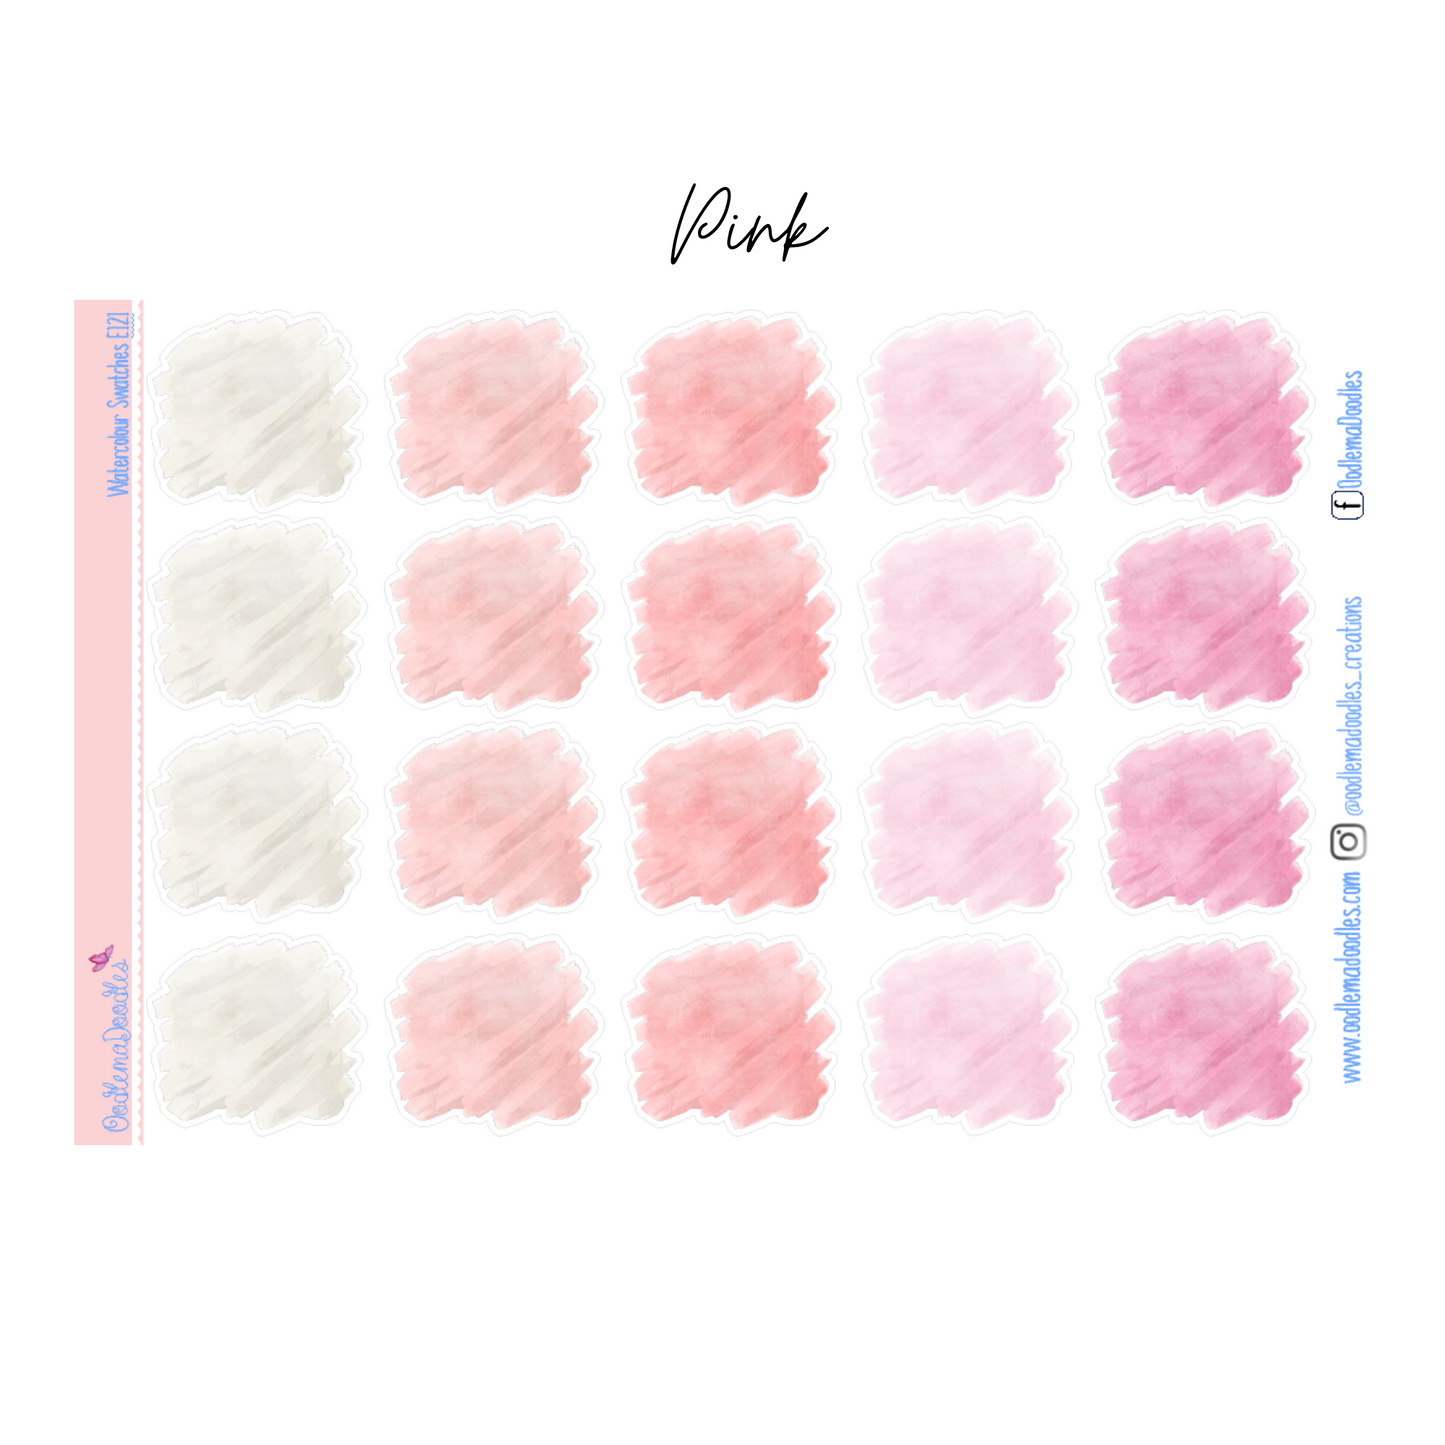 Watercolour Square Swatches Stickers